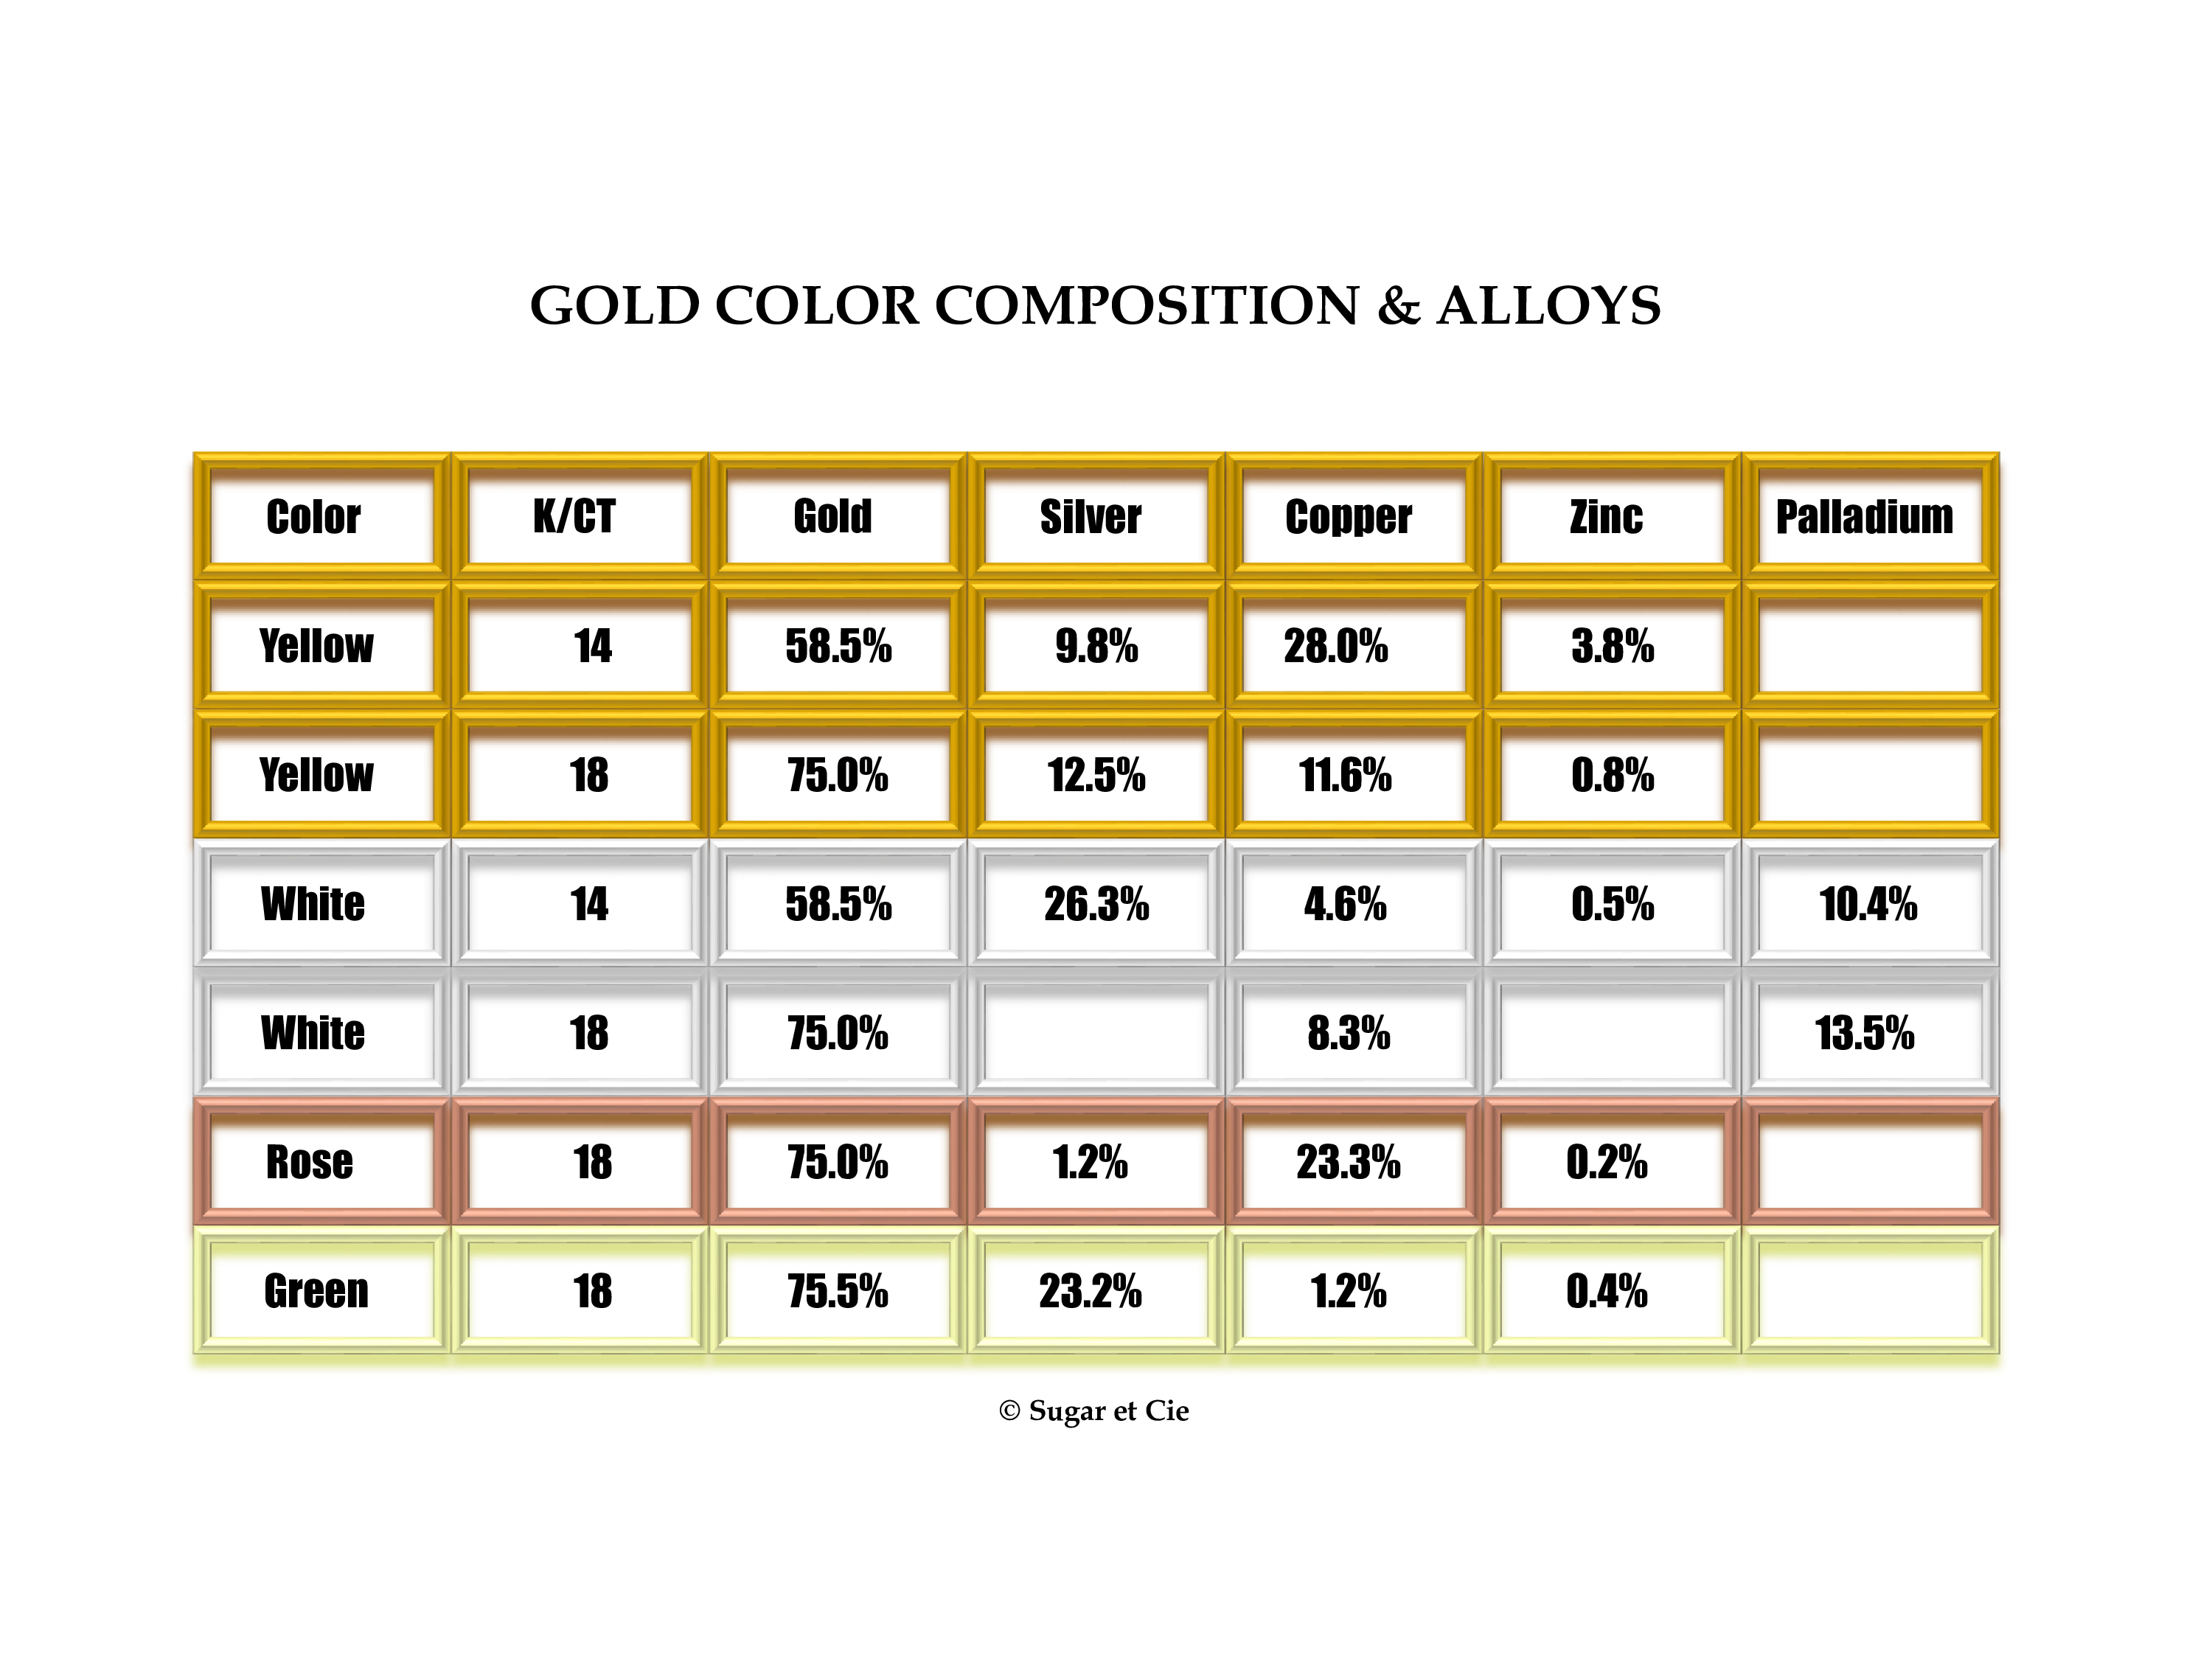 A table that depicts gold color (rose gold, yellow gold, white gold, green gold), gold purity (18k) and the percentage of alloys (Copper, Silver, Zinc, Palladium) that make-up each gold color